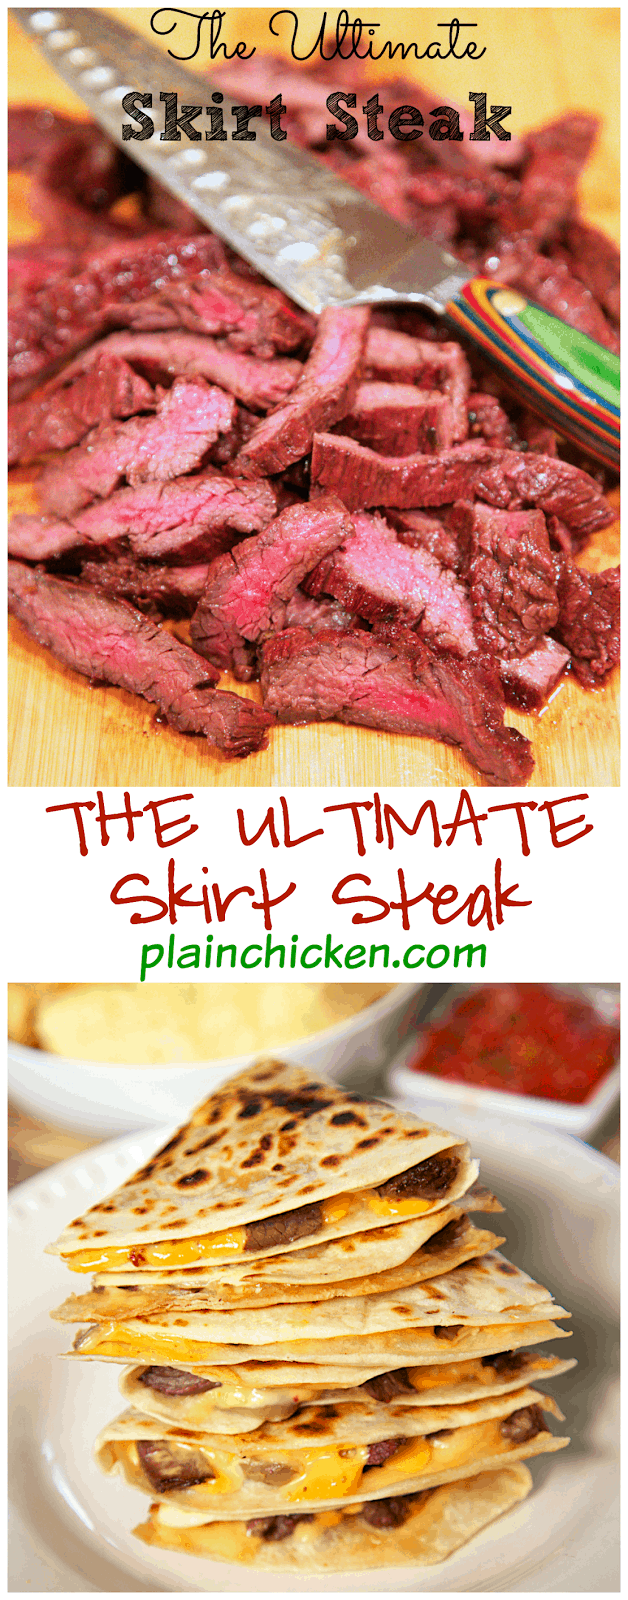 The Ultimate Skirt Steak - a  little sweet, a little heat, a whole lot of delicious! Skirt steak marinated in hot sauce, Italian dressing, onion, garlic, brown sugar and steak marinade.Let it marinate overnight for maximum flavor. Great on its own on in quesadillas or fajitas. We always make extra for leftovers!